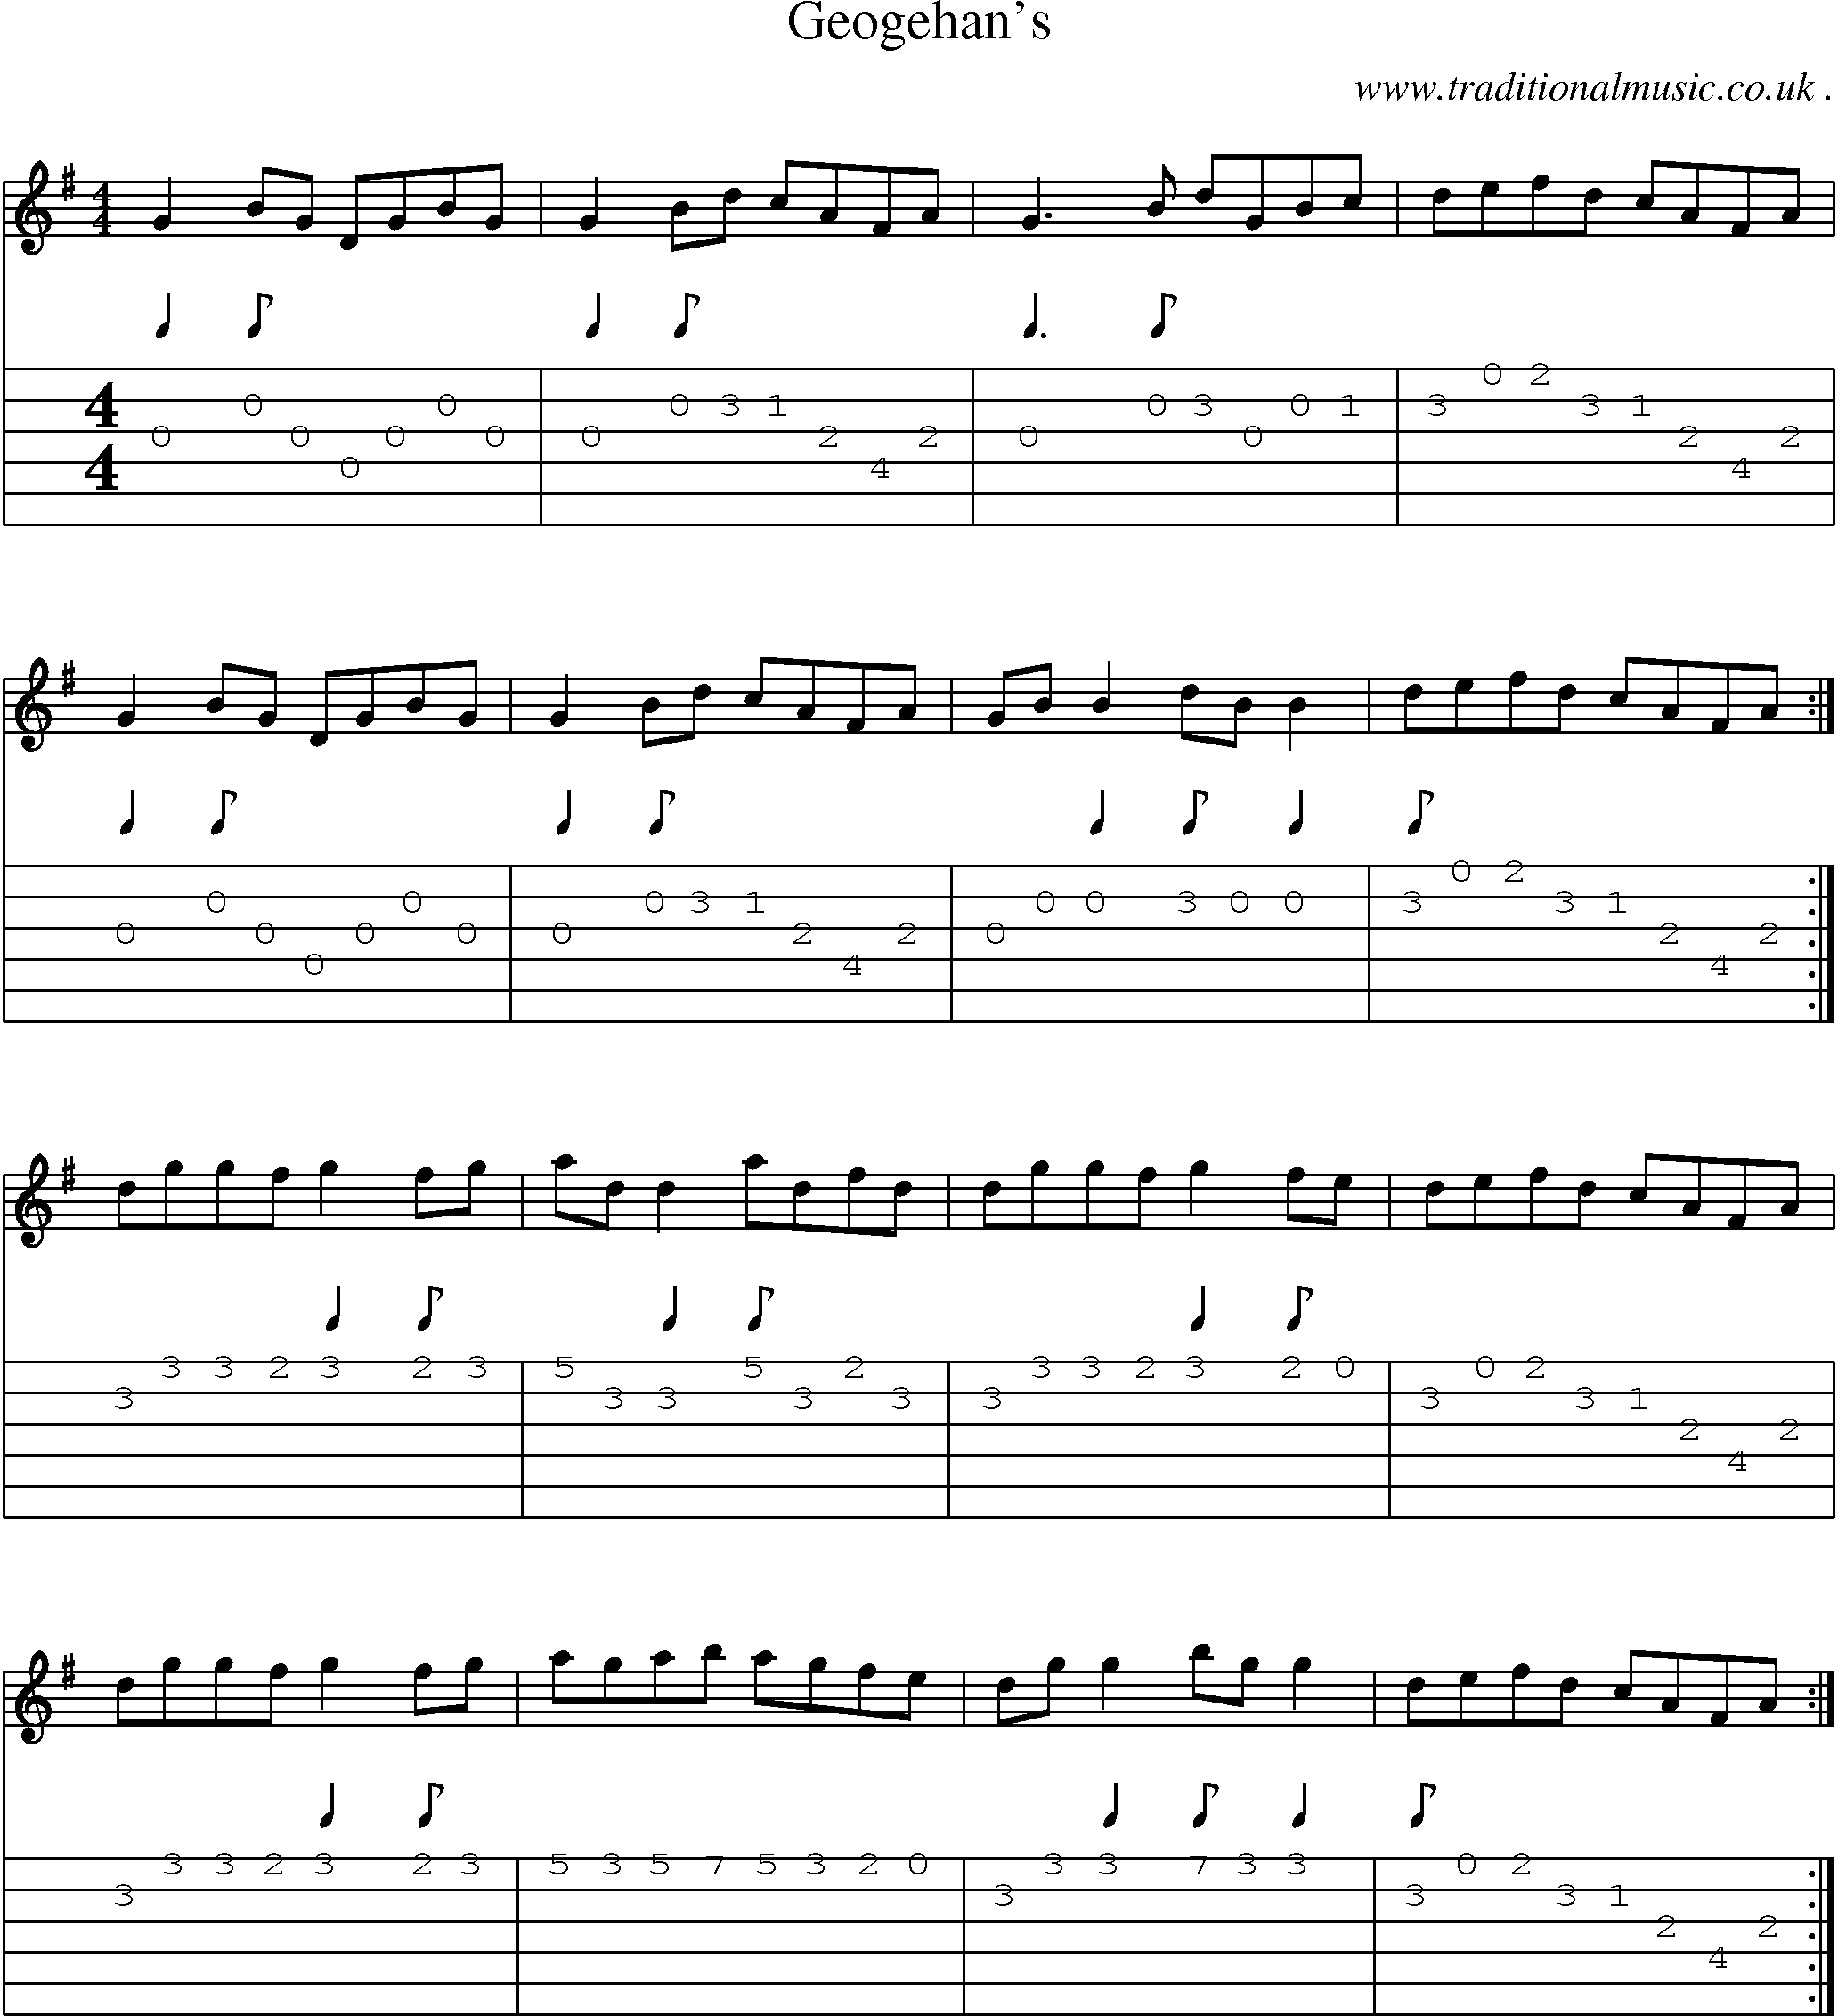 Sheet-Music and Guitar Tabs for Geogehans